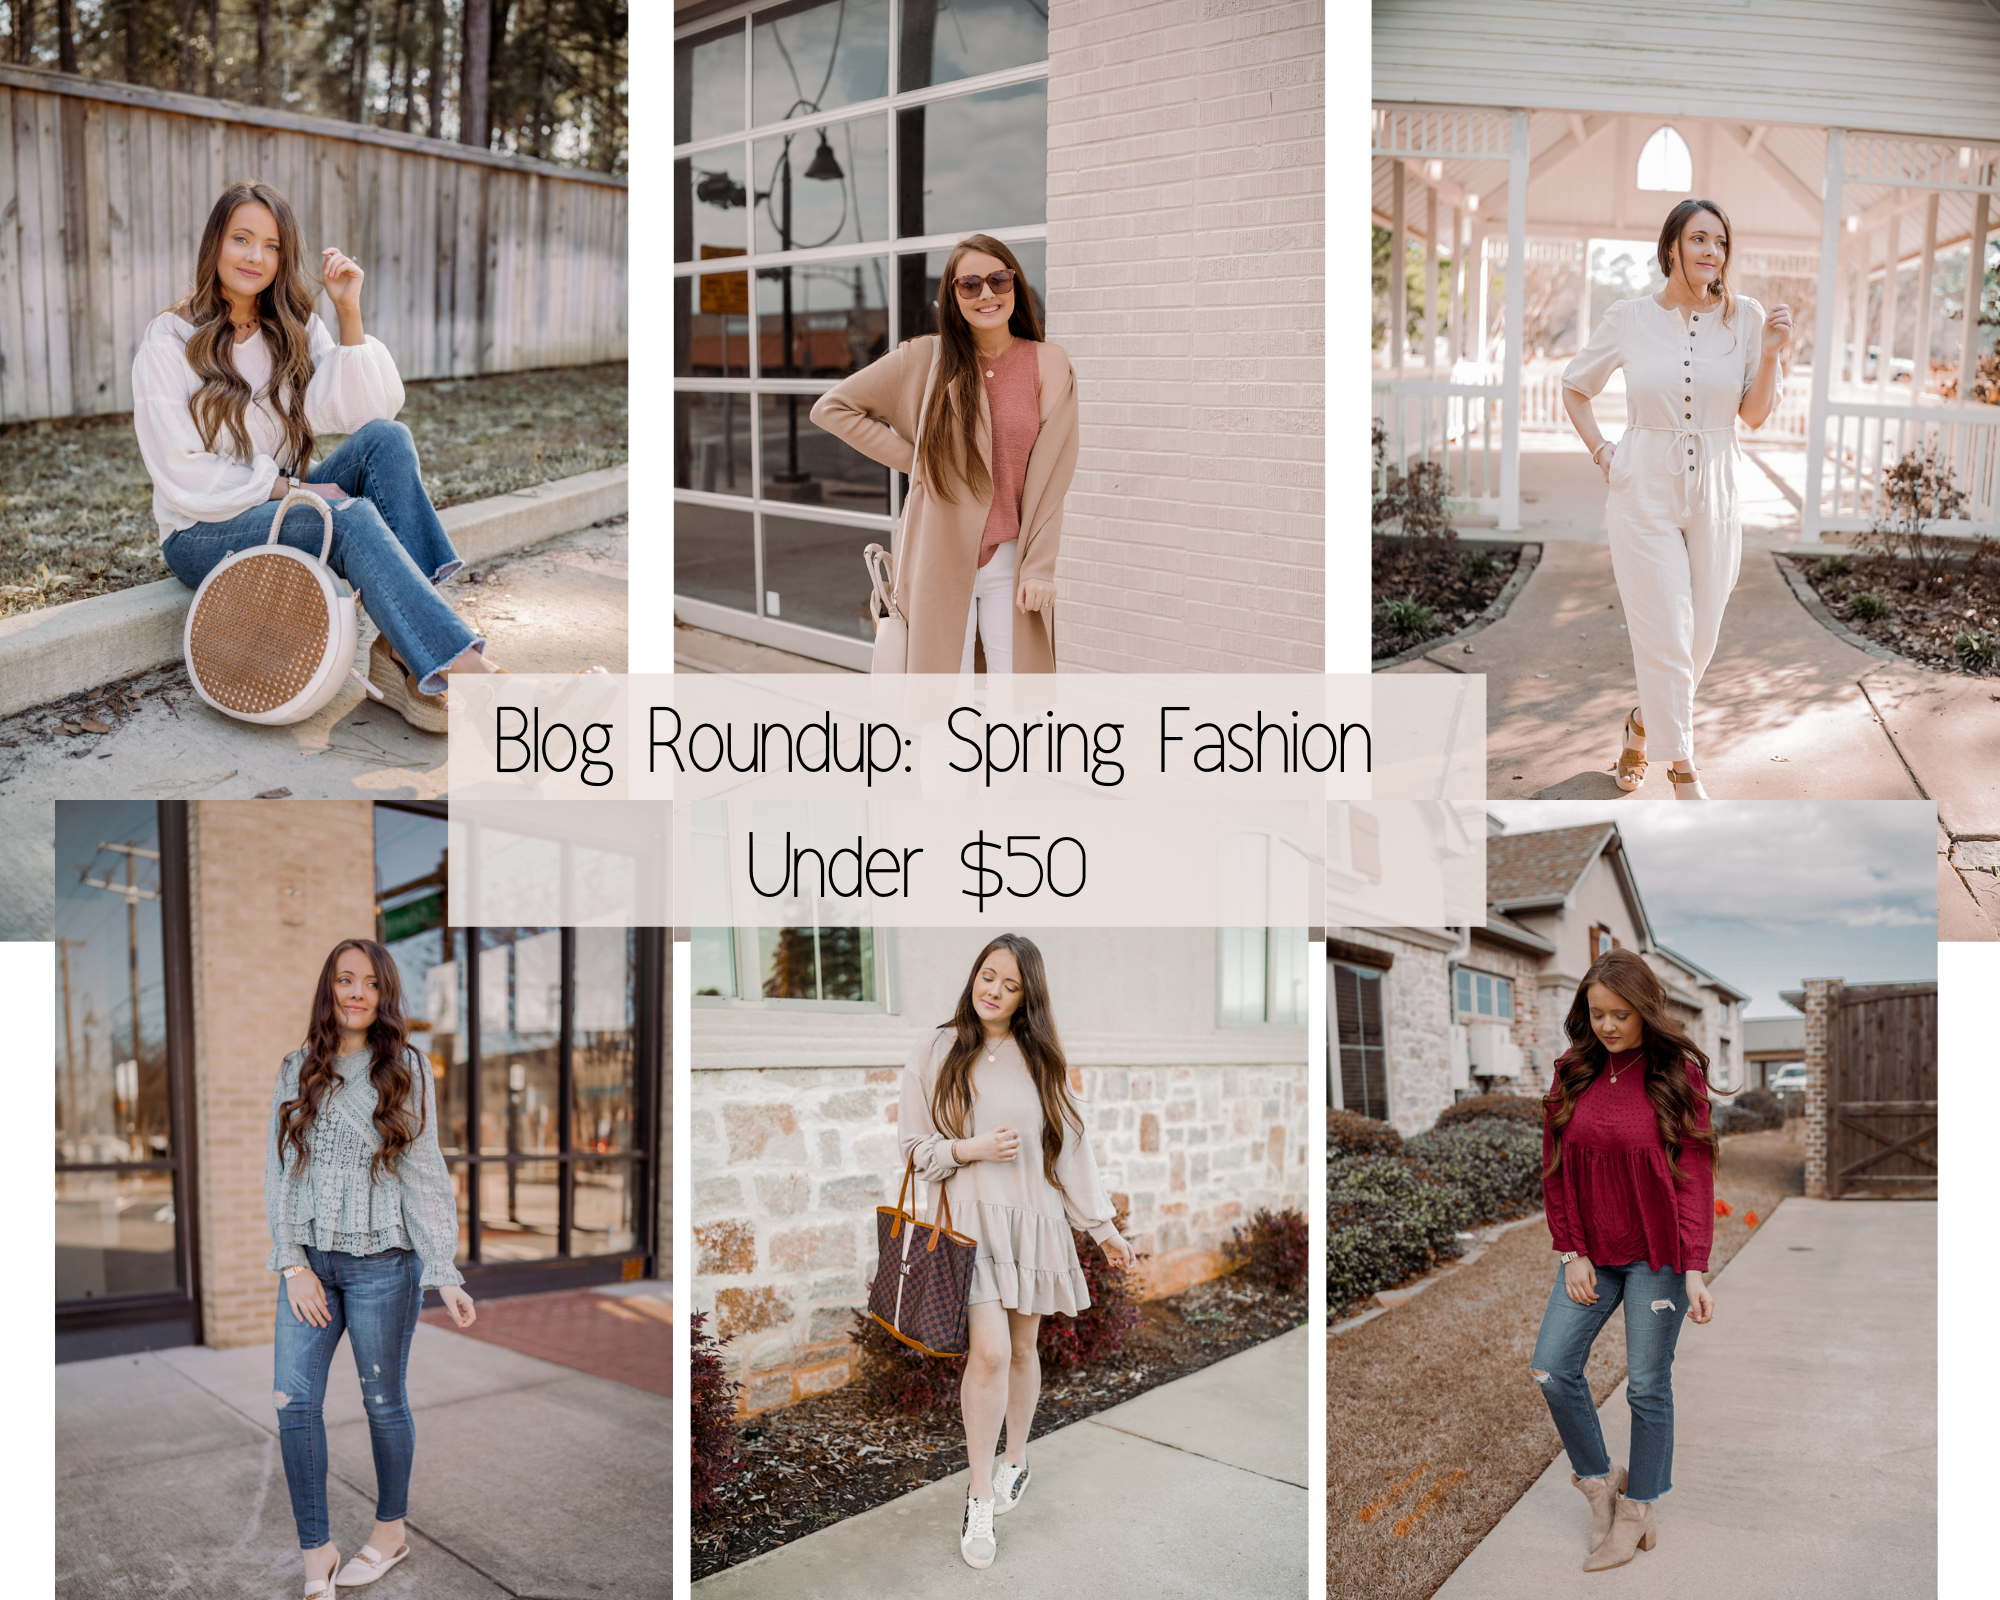 Blog Roundup: Spring Fashion Under $50 From Latest Fashion Posts